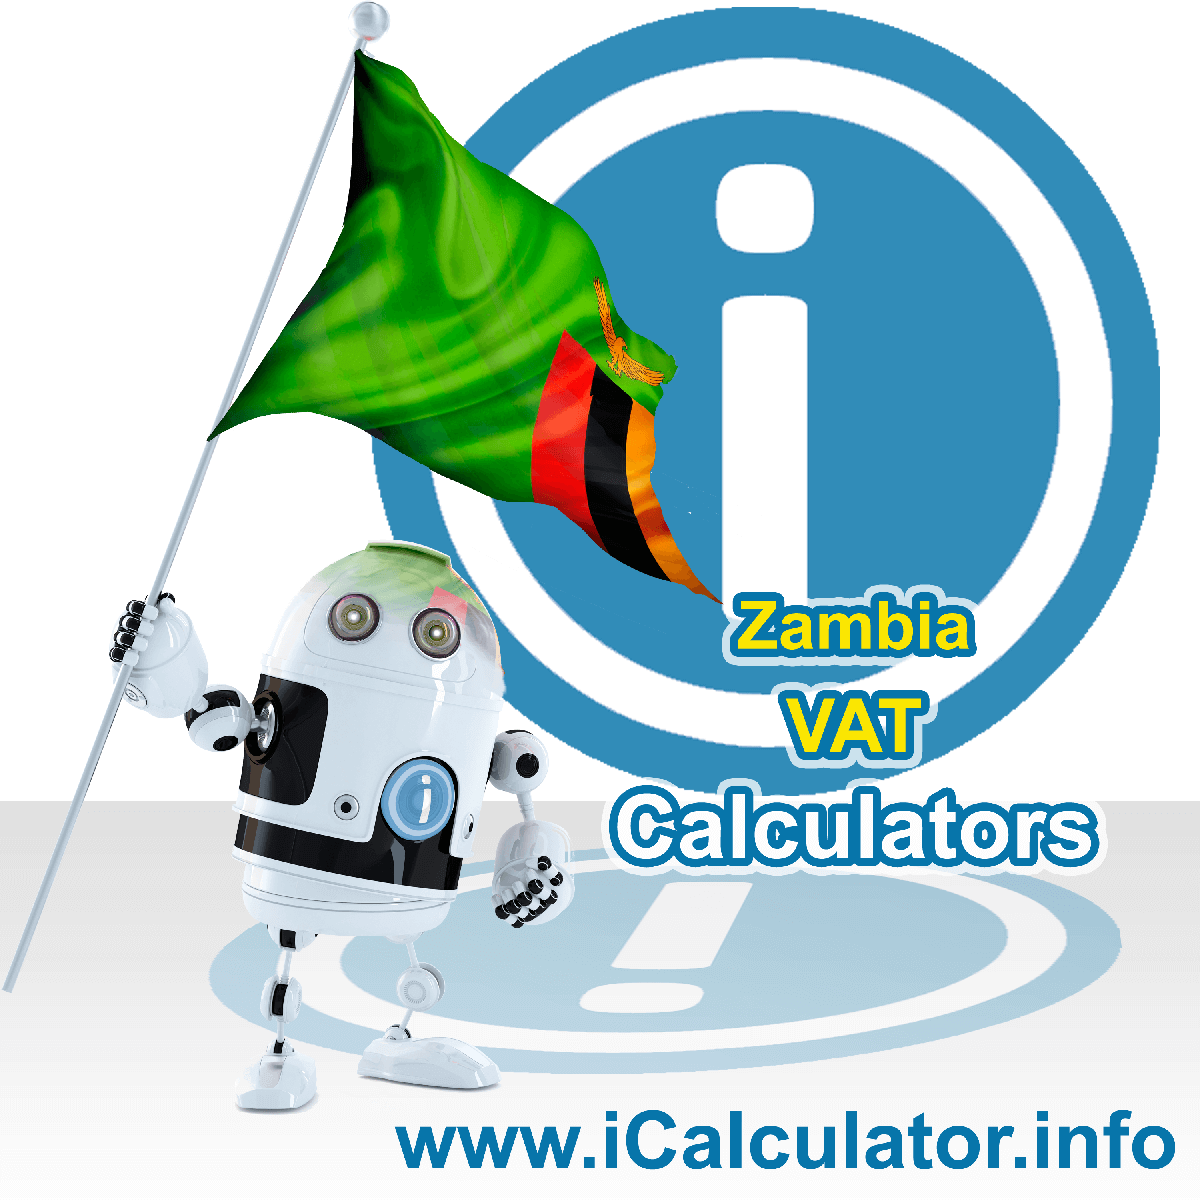 Zambia VAT Calculator. This image shows the Zambia flag and information relating to the VAT formula used for calculating Value Added Tax in Zambia using the Zambia VAT Calculator in 2023